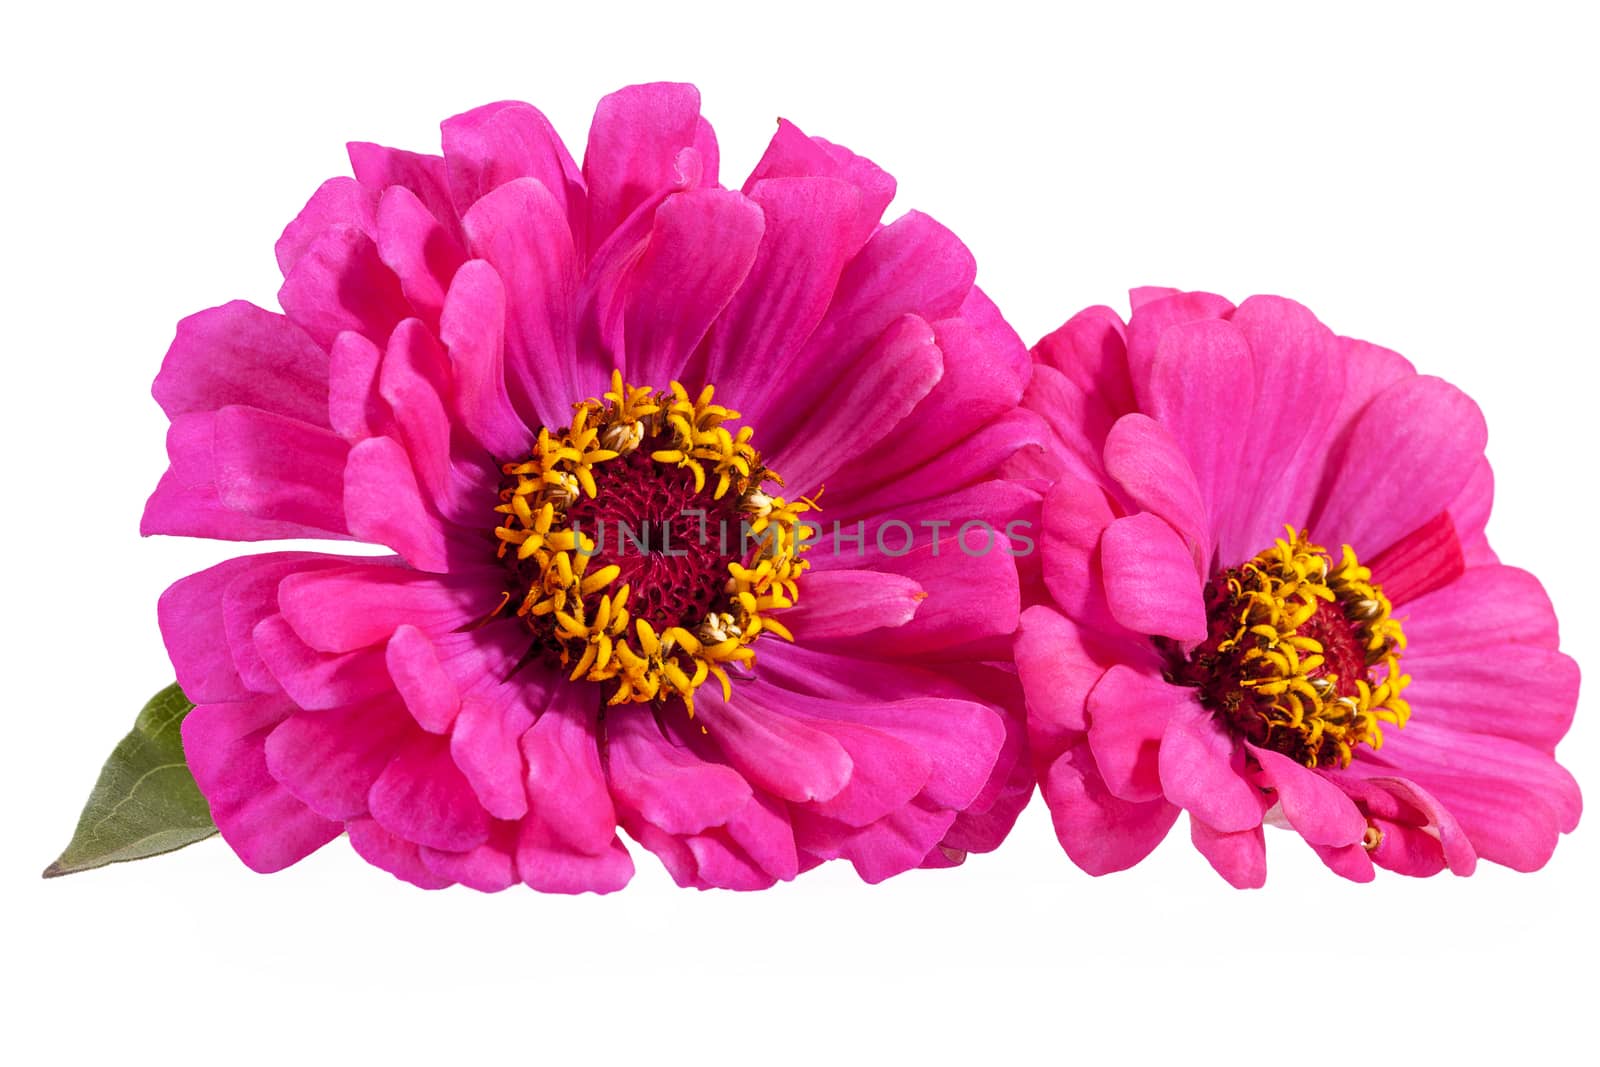 Flowers of pink zinnia isolated on white background by mychadre77